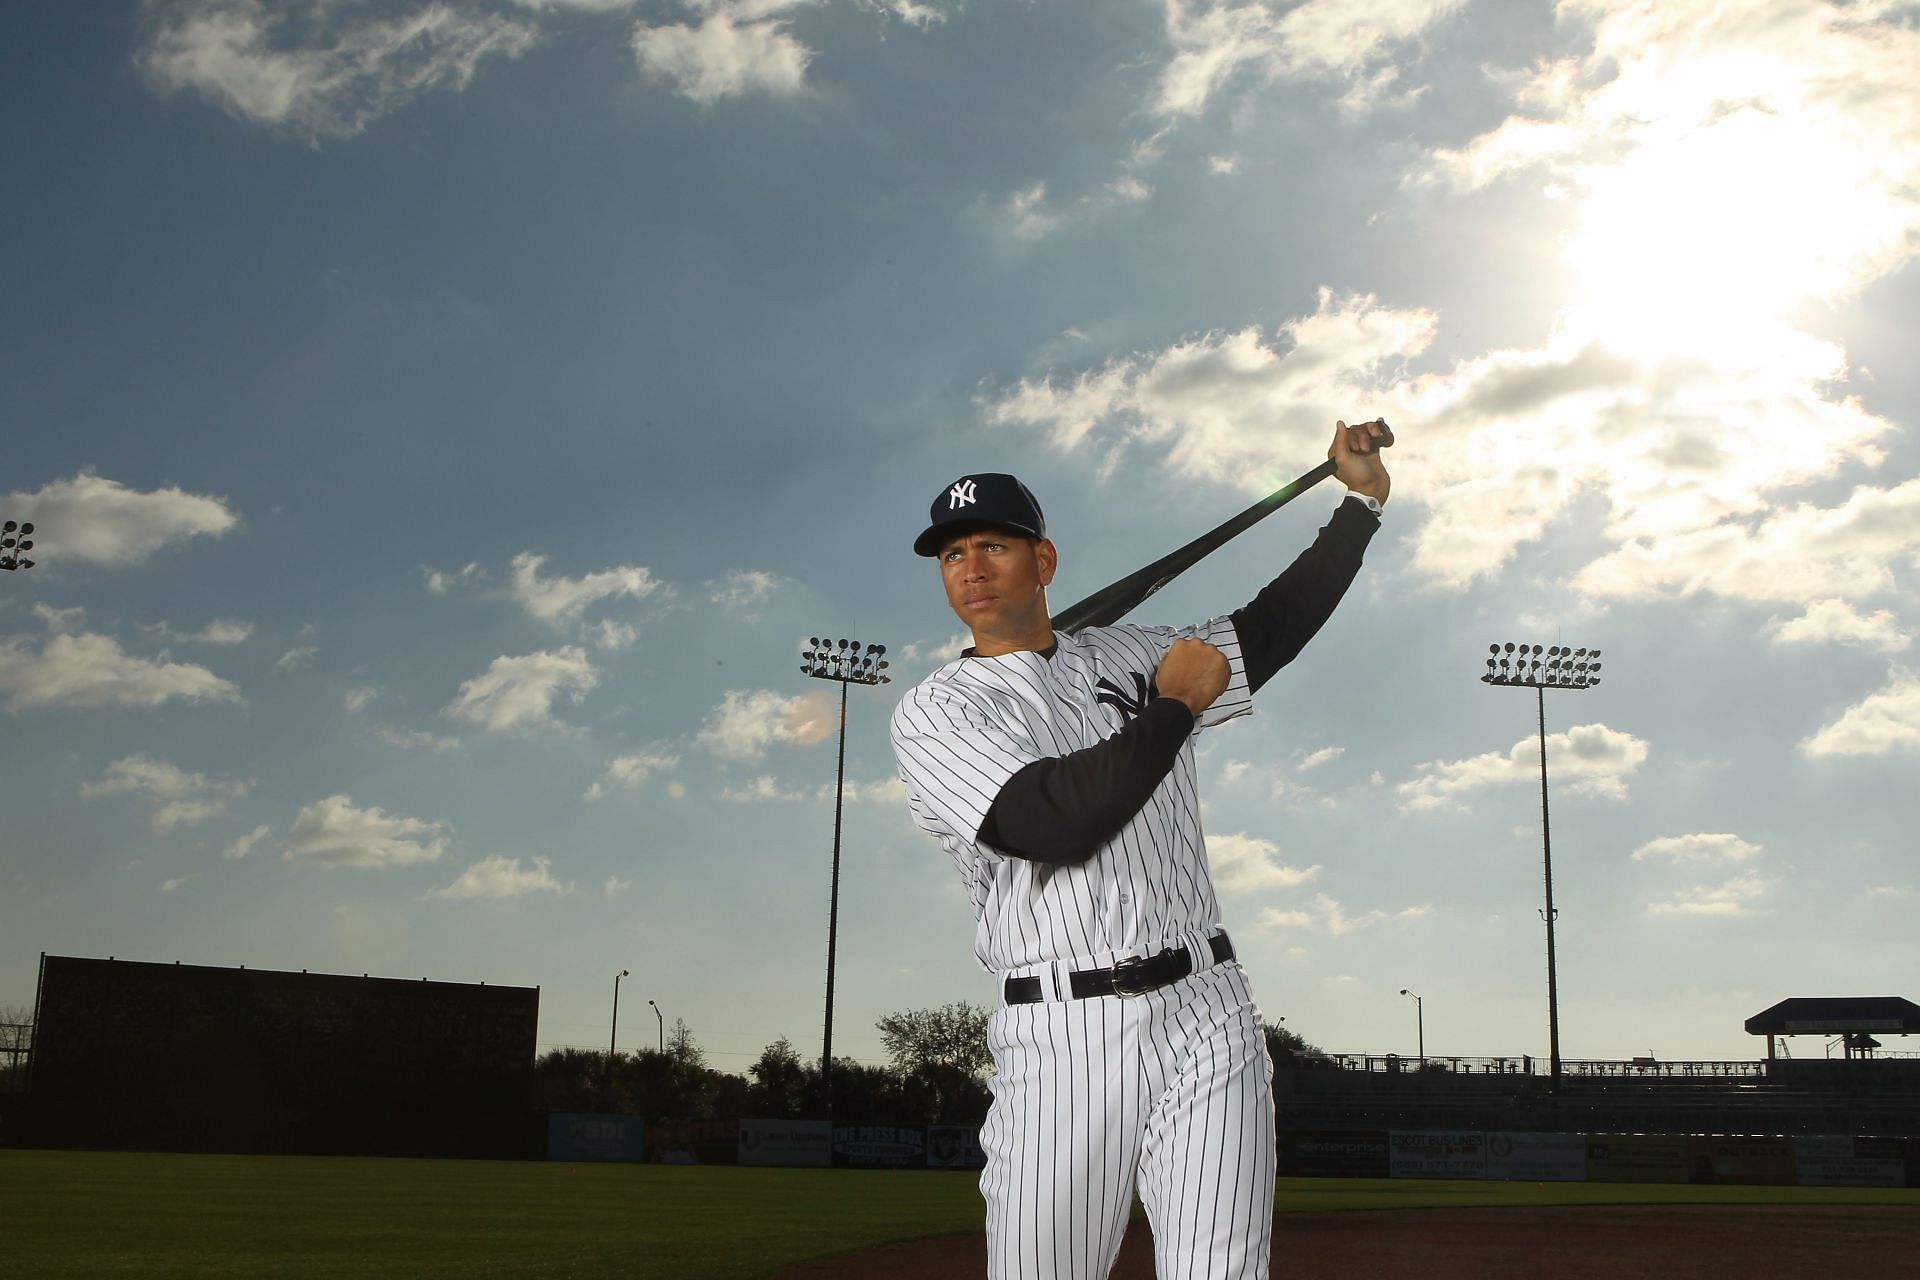 Alex Rodriguez #13 of the New York Yankees poses for a photo during Spring Training Media Photo Day at George M. Steinbrenner Field on February 25, 2010 in Tampa, Florida. (Photo by Nick Laham/Getty Images)